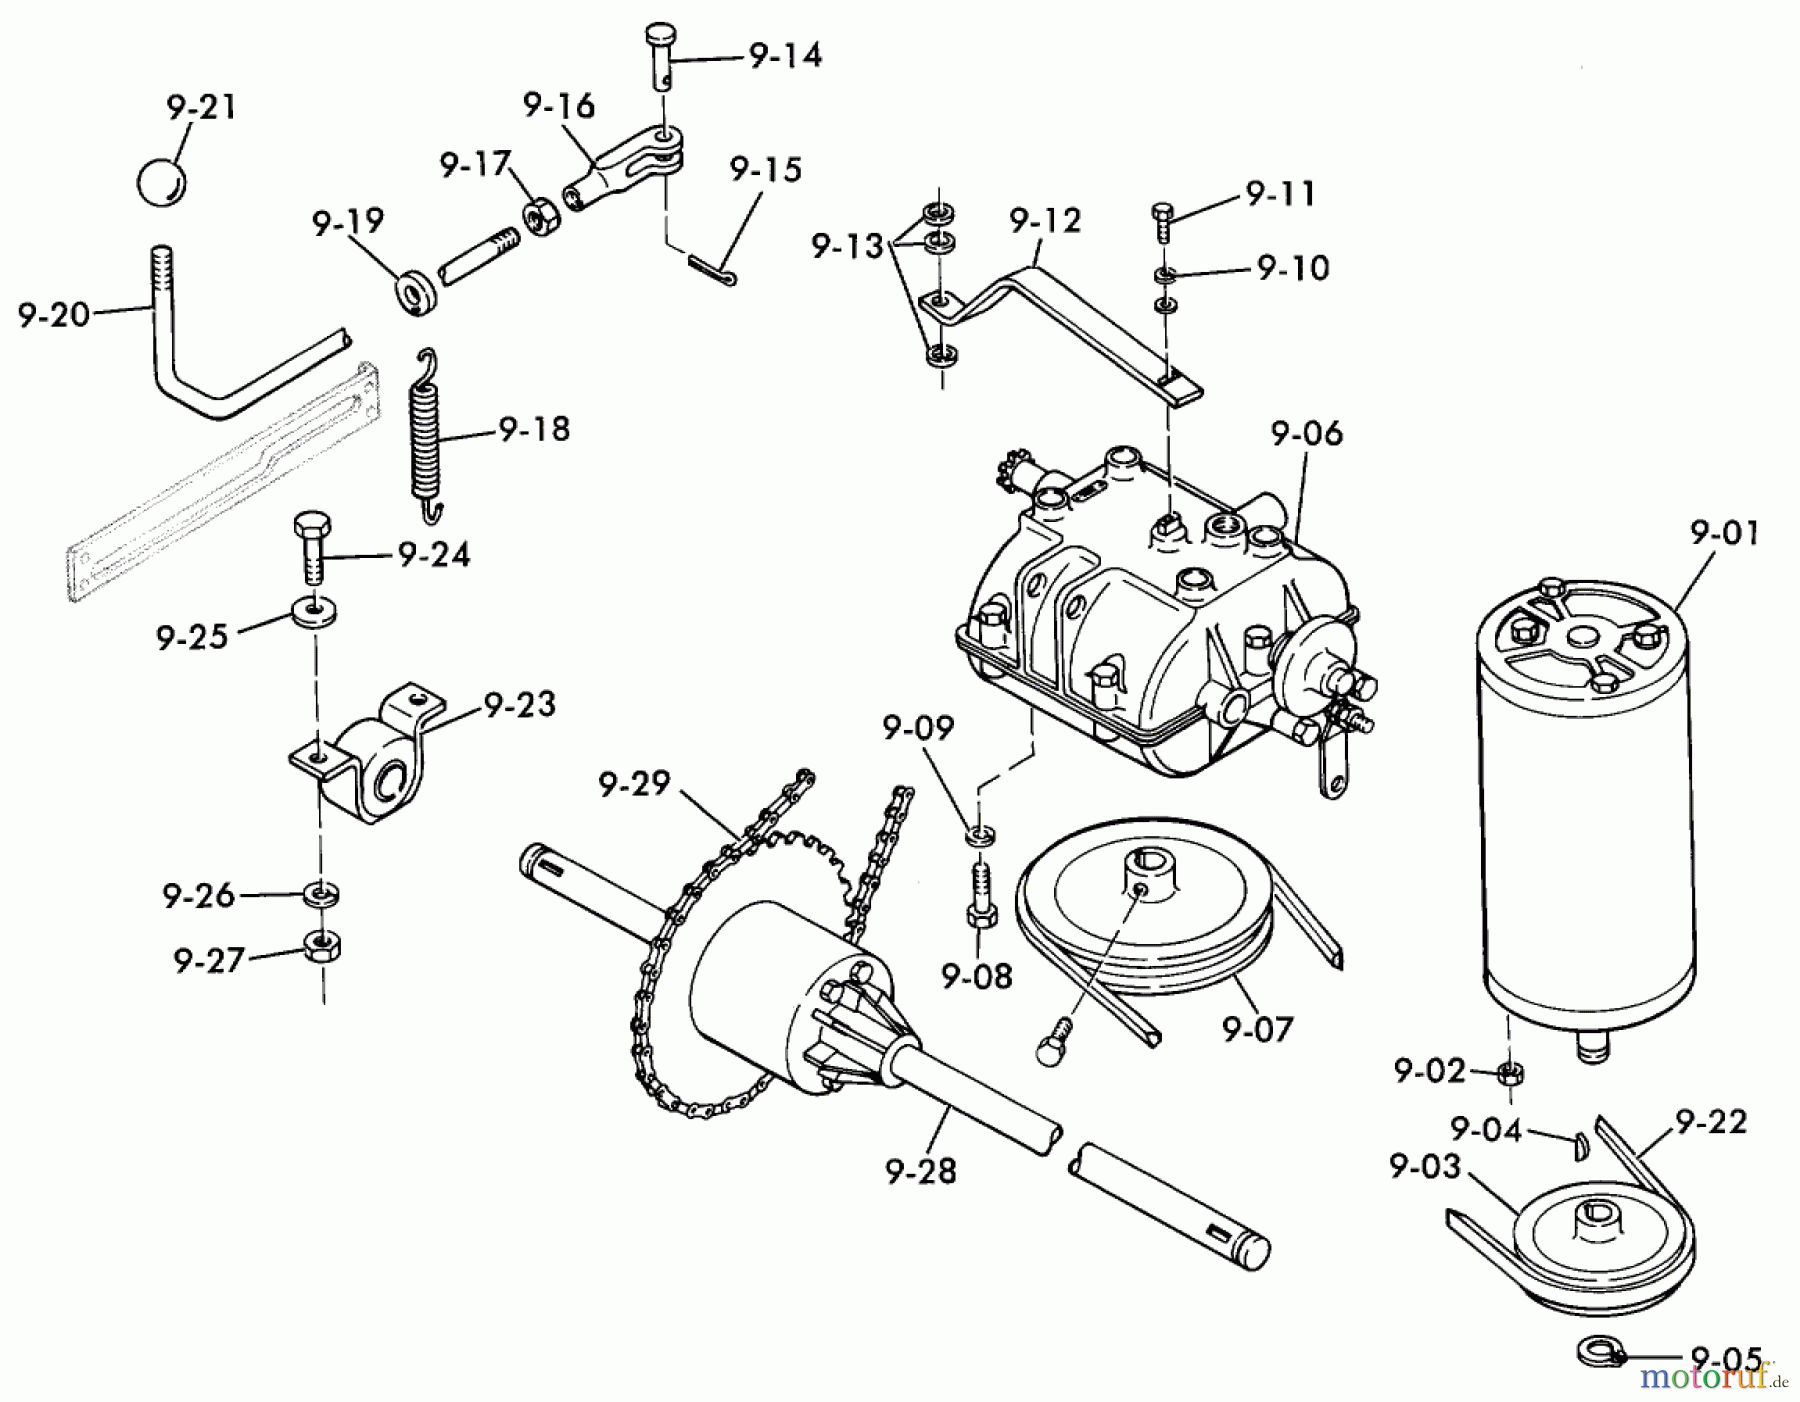  Toro Neu Mowers, Lawn & Garden Tractor Seite 1 3-6000 (A-65) - Toro A-65 Elec-Trak, 1975 A-65 PARTS MANUAL E9.000 MOTOR, TRANSMISSION AND DRIVE SYSTEM (FIG. 9)